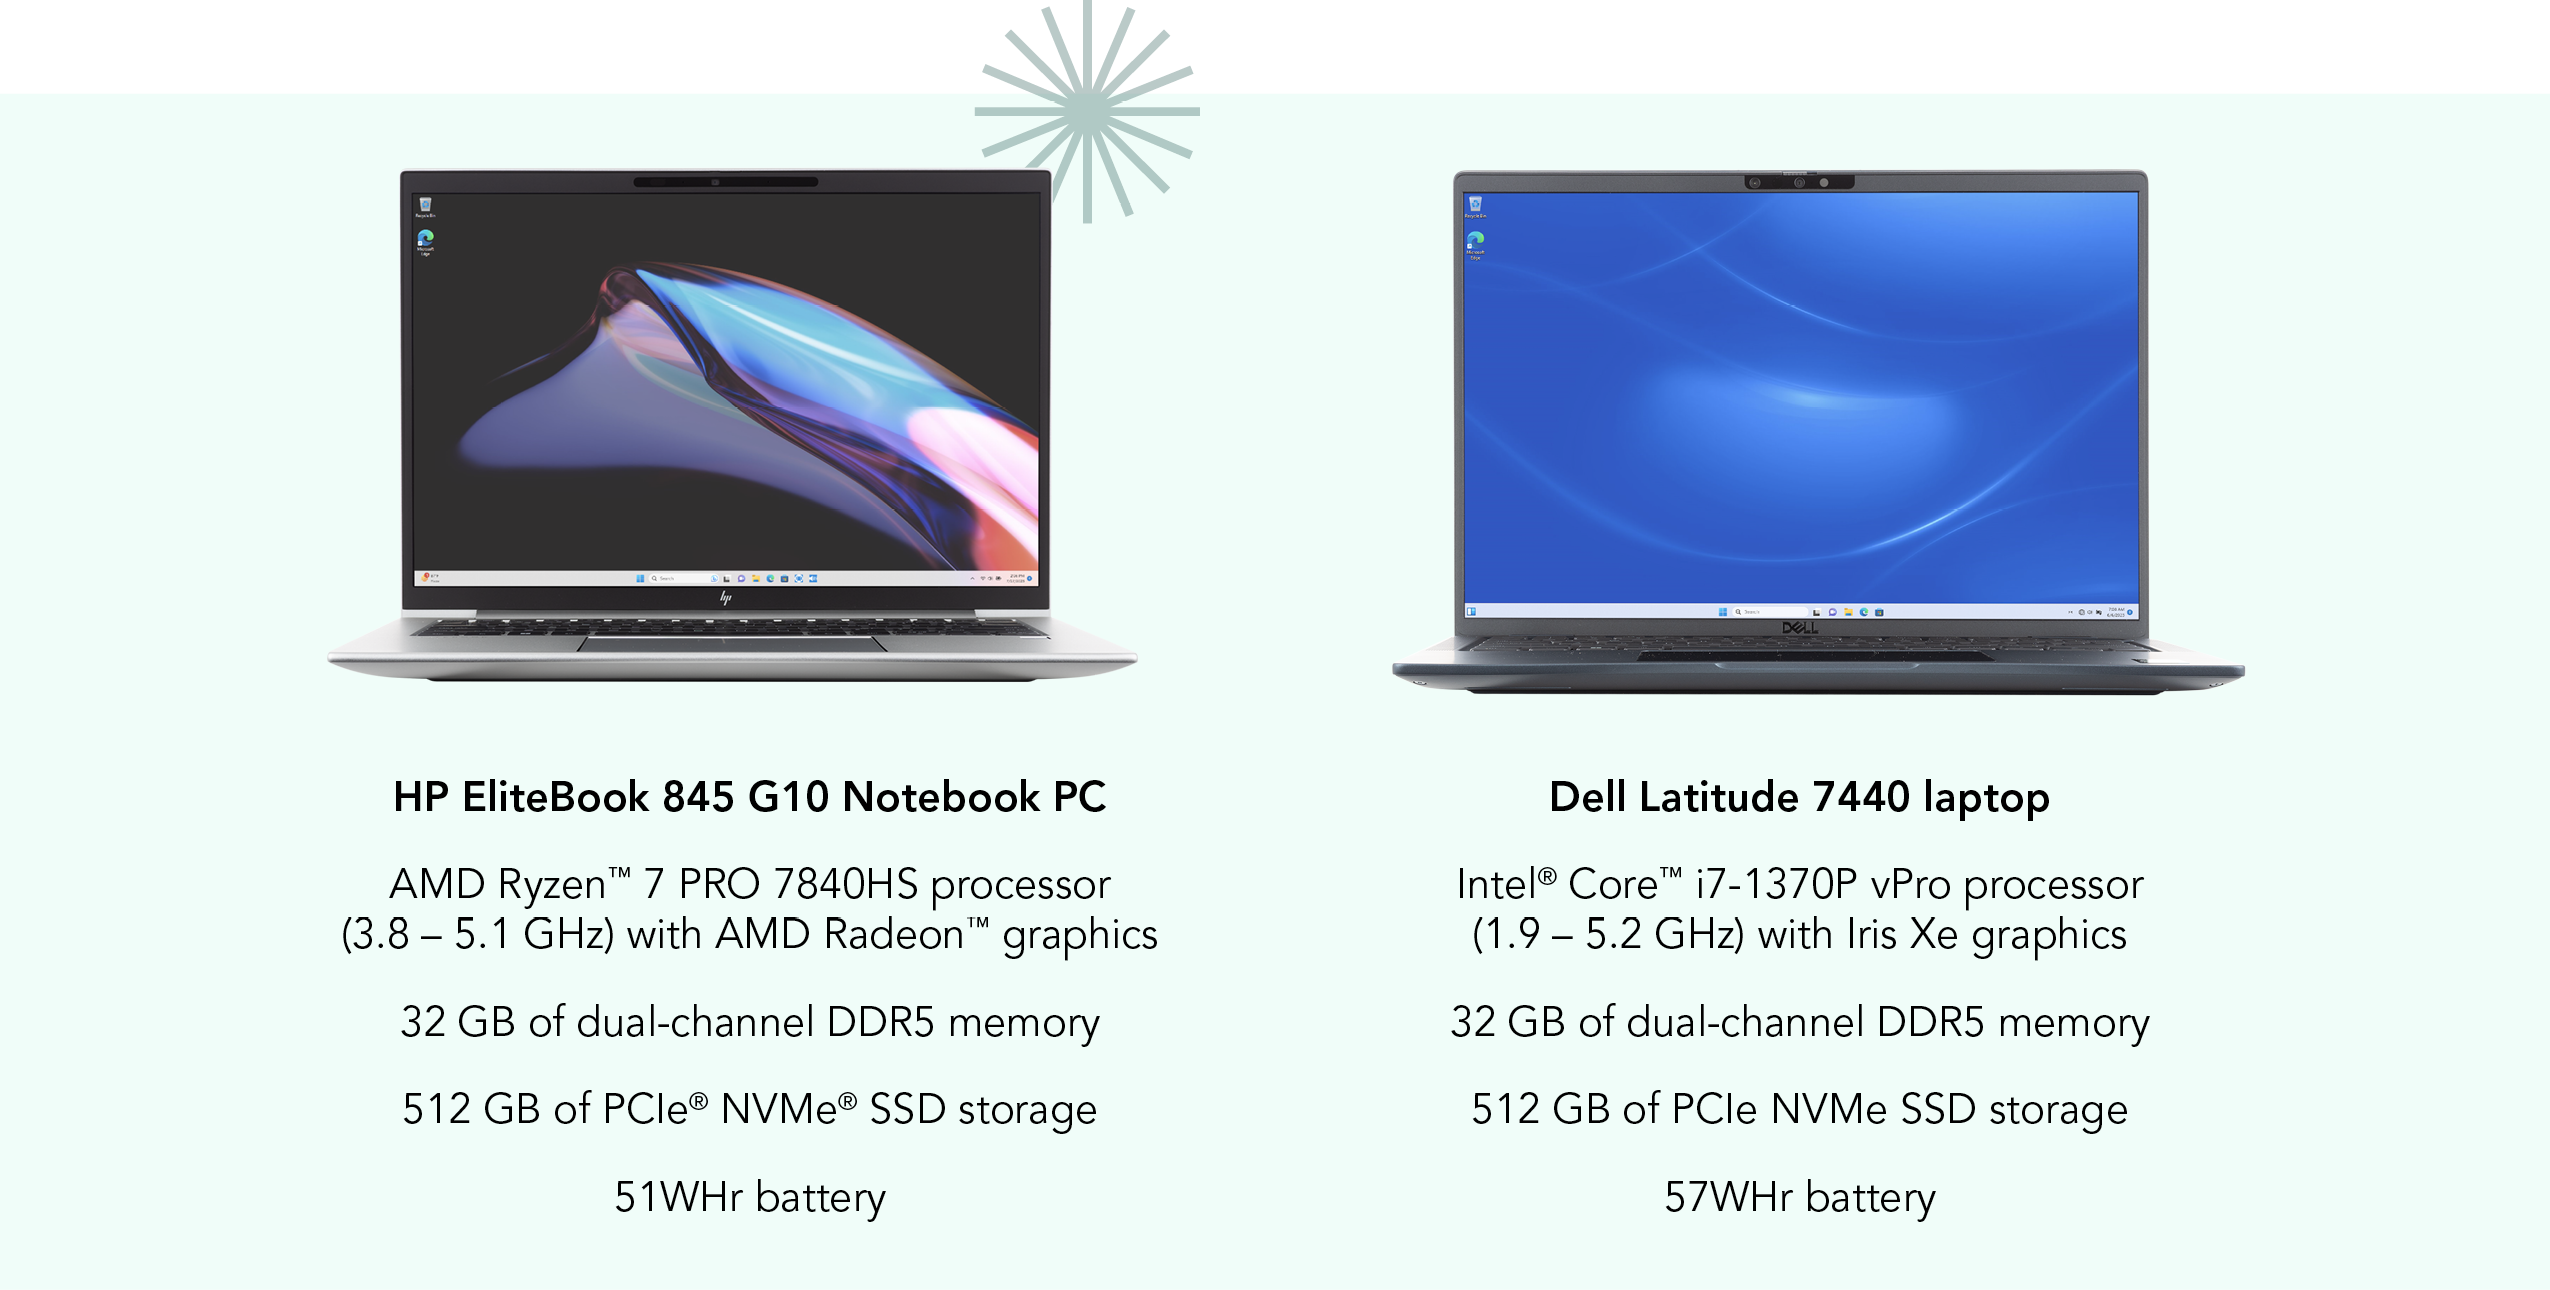 Comparison of key system configuration specifications. HP EliteBook 845 G10 Notebook PC Configuration: AMD Ryzen™ 7 PRO 7840HS processor; (3.8 – 5.1 GHz) with AMD Radeon™ graphics; 32 GB of dual-channel DDR5 memory; 512 GB of PCIe® NVMe® SSD storage; 51WHr battery. Dell Latitude 7440 laptop Configuration: Intel® Core™ i7-1370P vPro processor; (1.9 – 5.2 GHz) with Iris Xe graphics; 32 GB of dual-channel DDR5 memory; 512 GB of PCIe NVMe SSD storage; 57WHr battery.